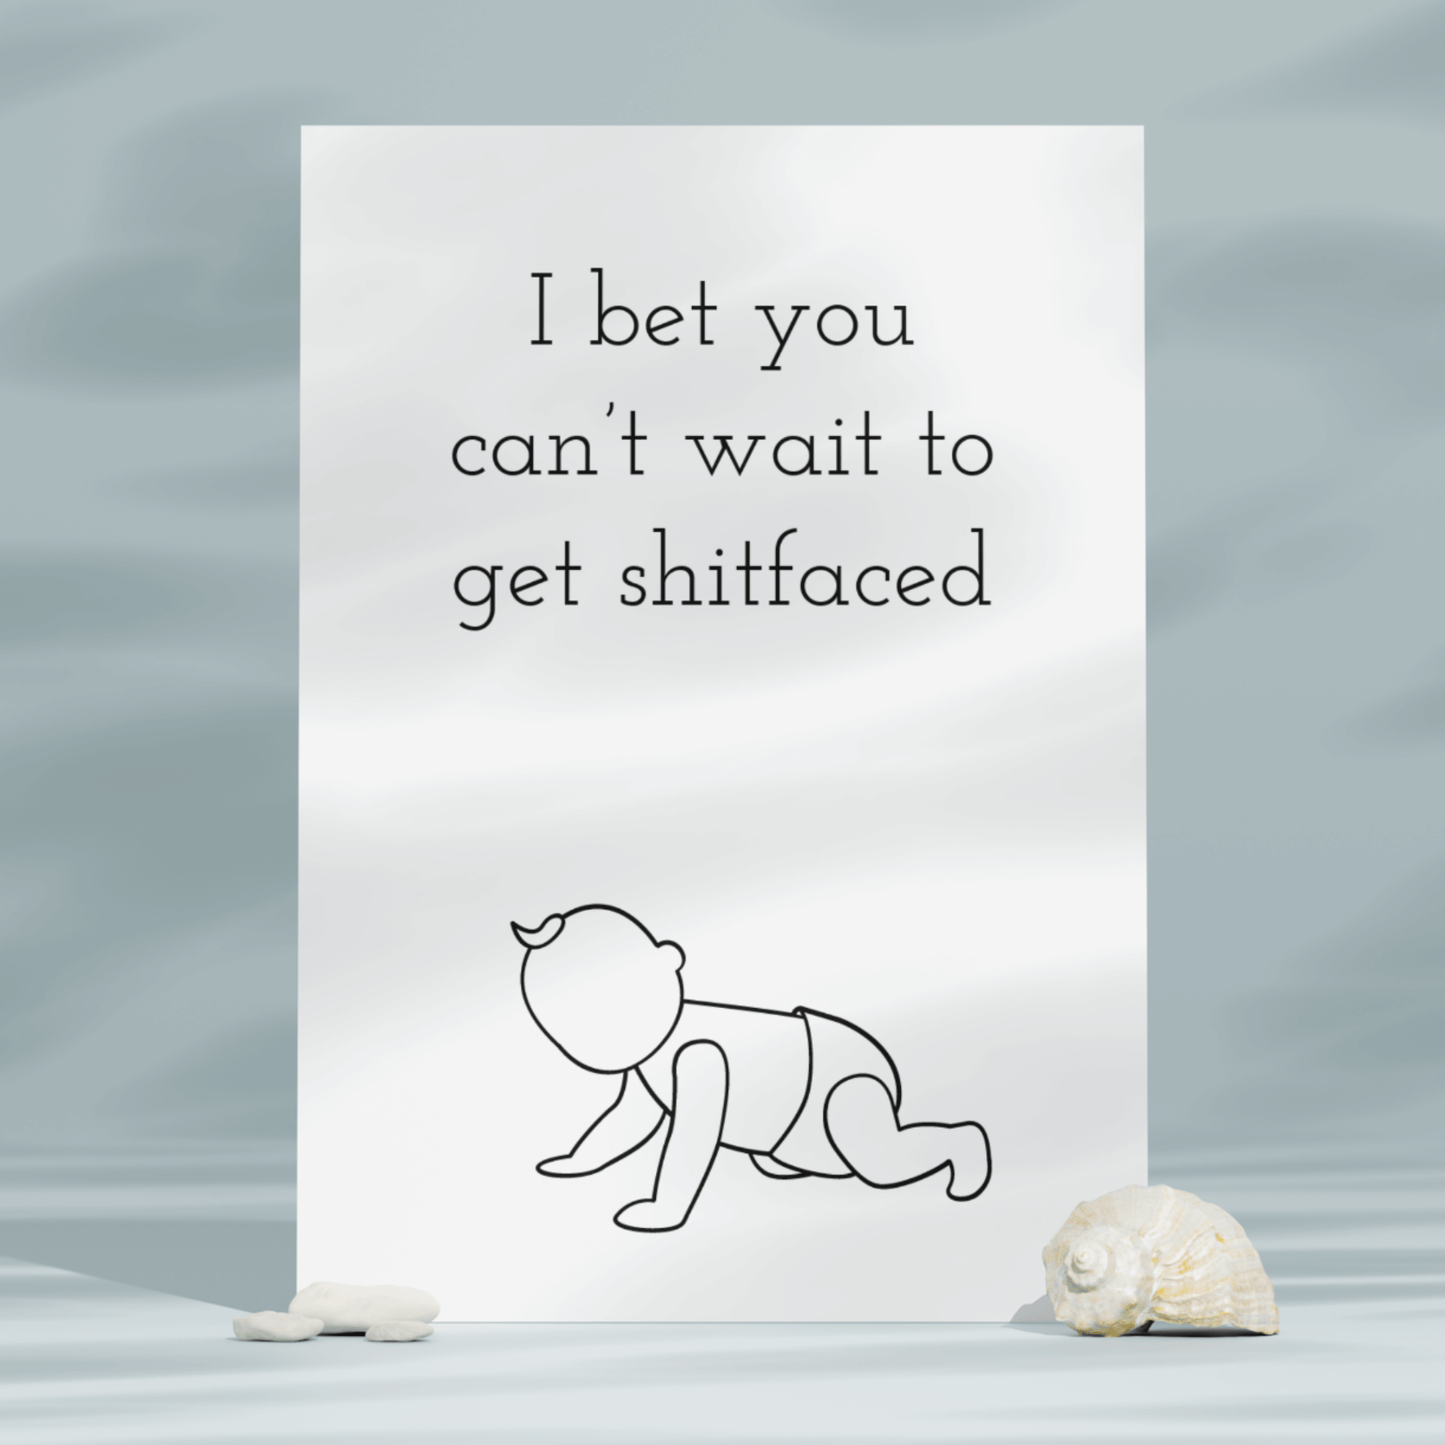 Little Kraken's Can't Wait to Get Shitfaced, New Baby Cards for £3.50 each